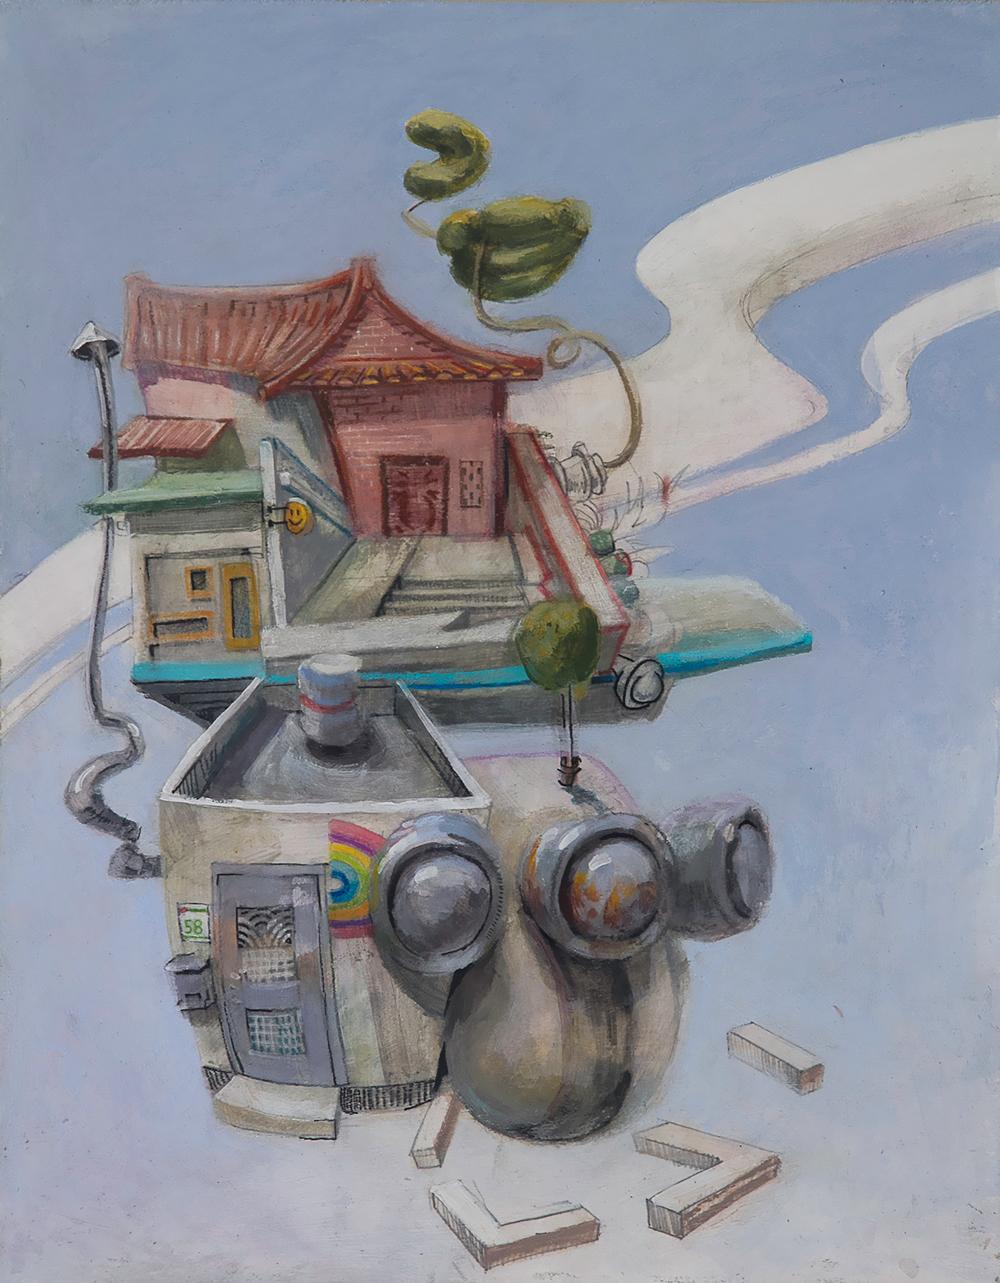 Benjamin Duke Figurative Painting - Hyperobject, Surreal Architectural Landscape, Blue Sky & Clouds, Oil on Panel